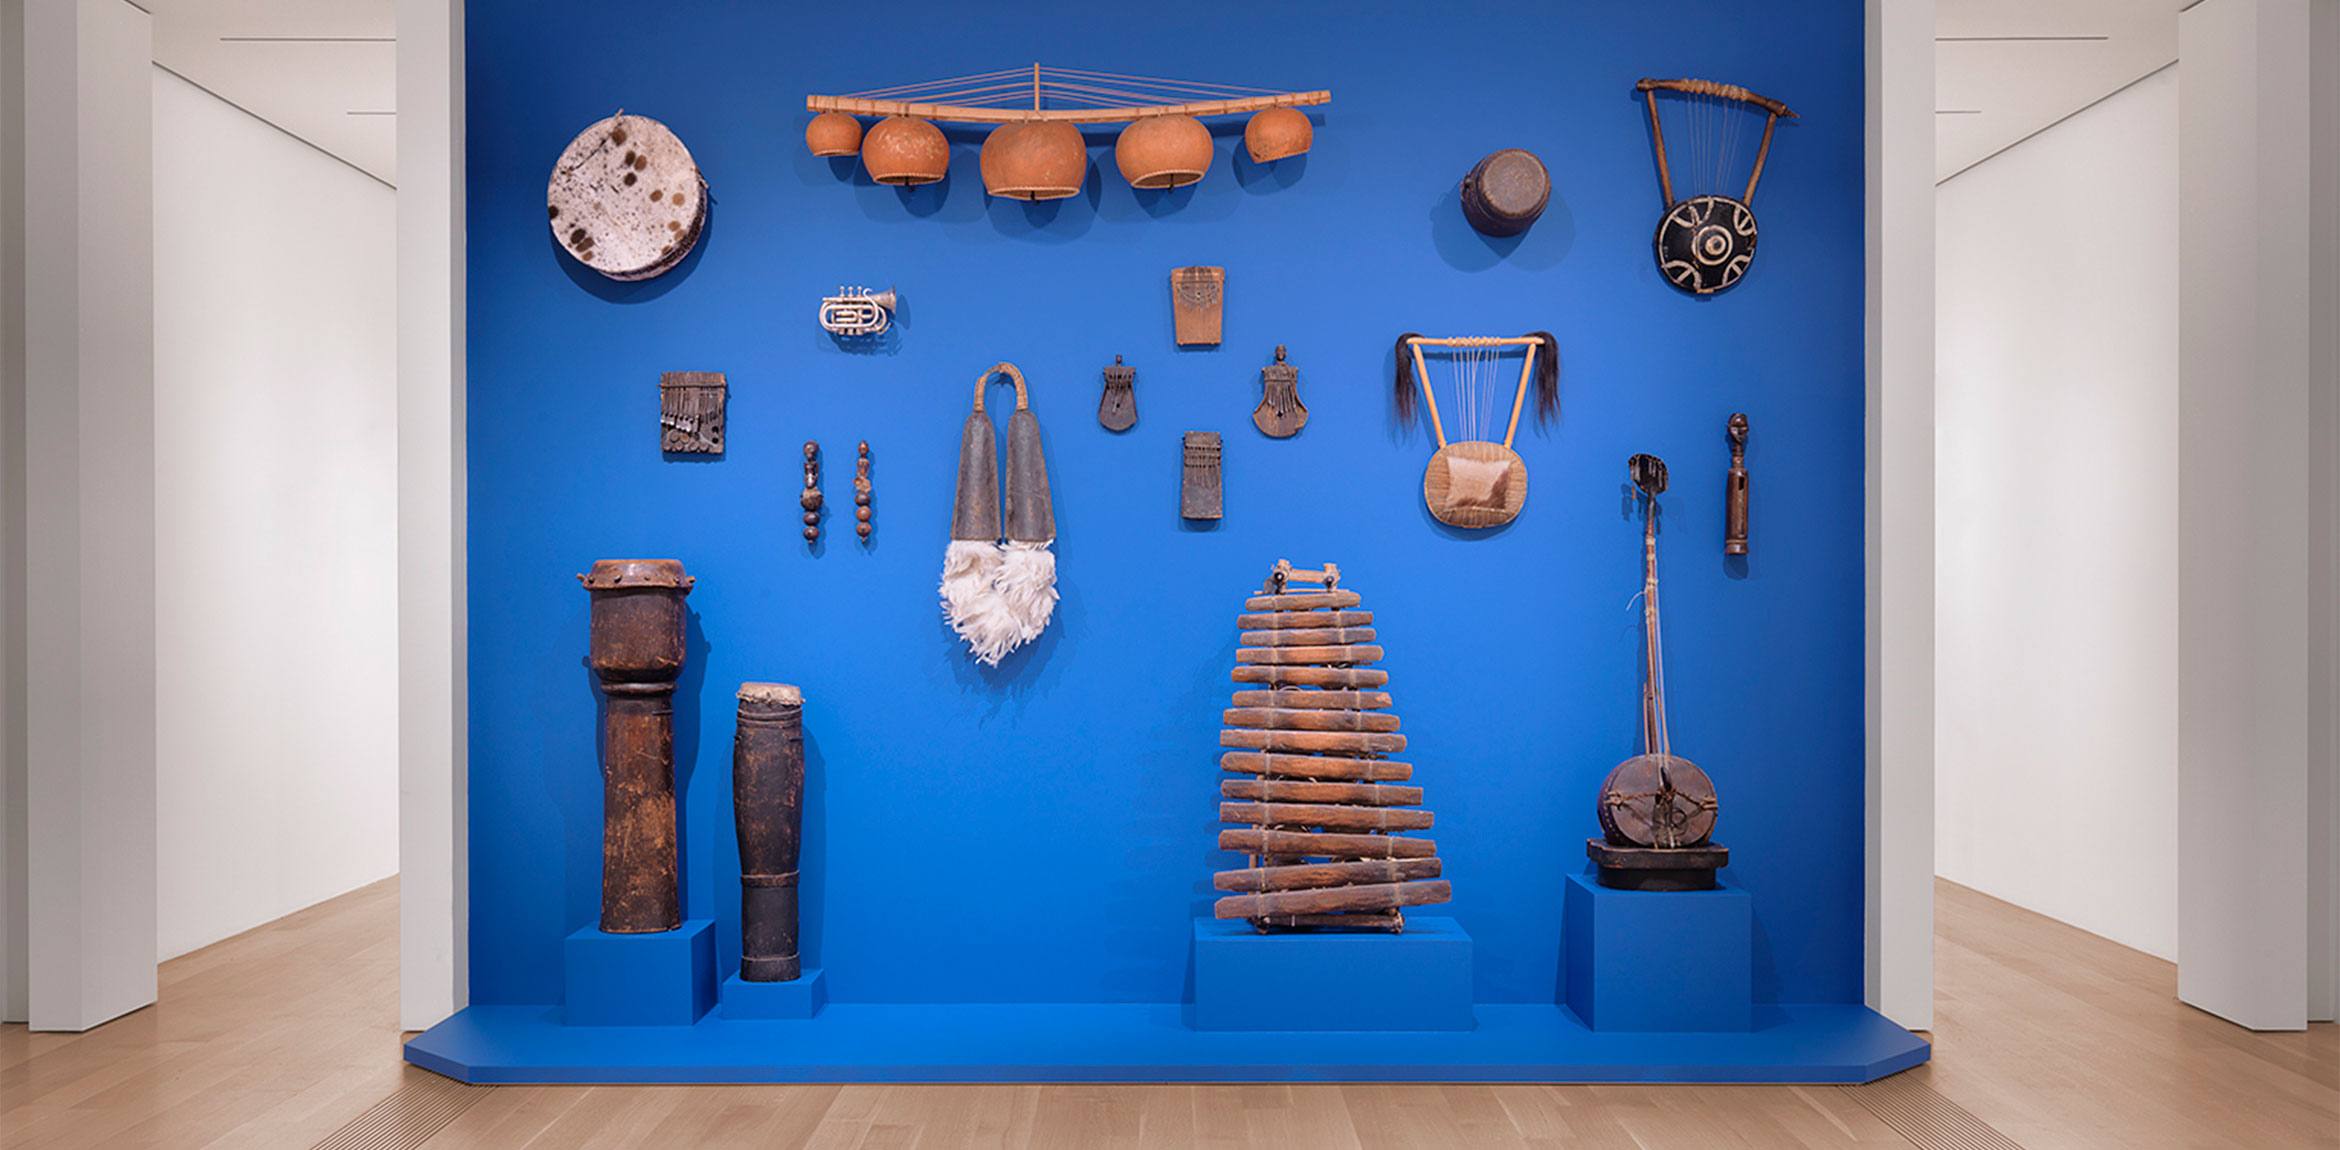 An exhibition view of Terry Adkins' collection of musical instruments, installed against a royal blue wall in the Lower East Gallery.